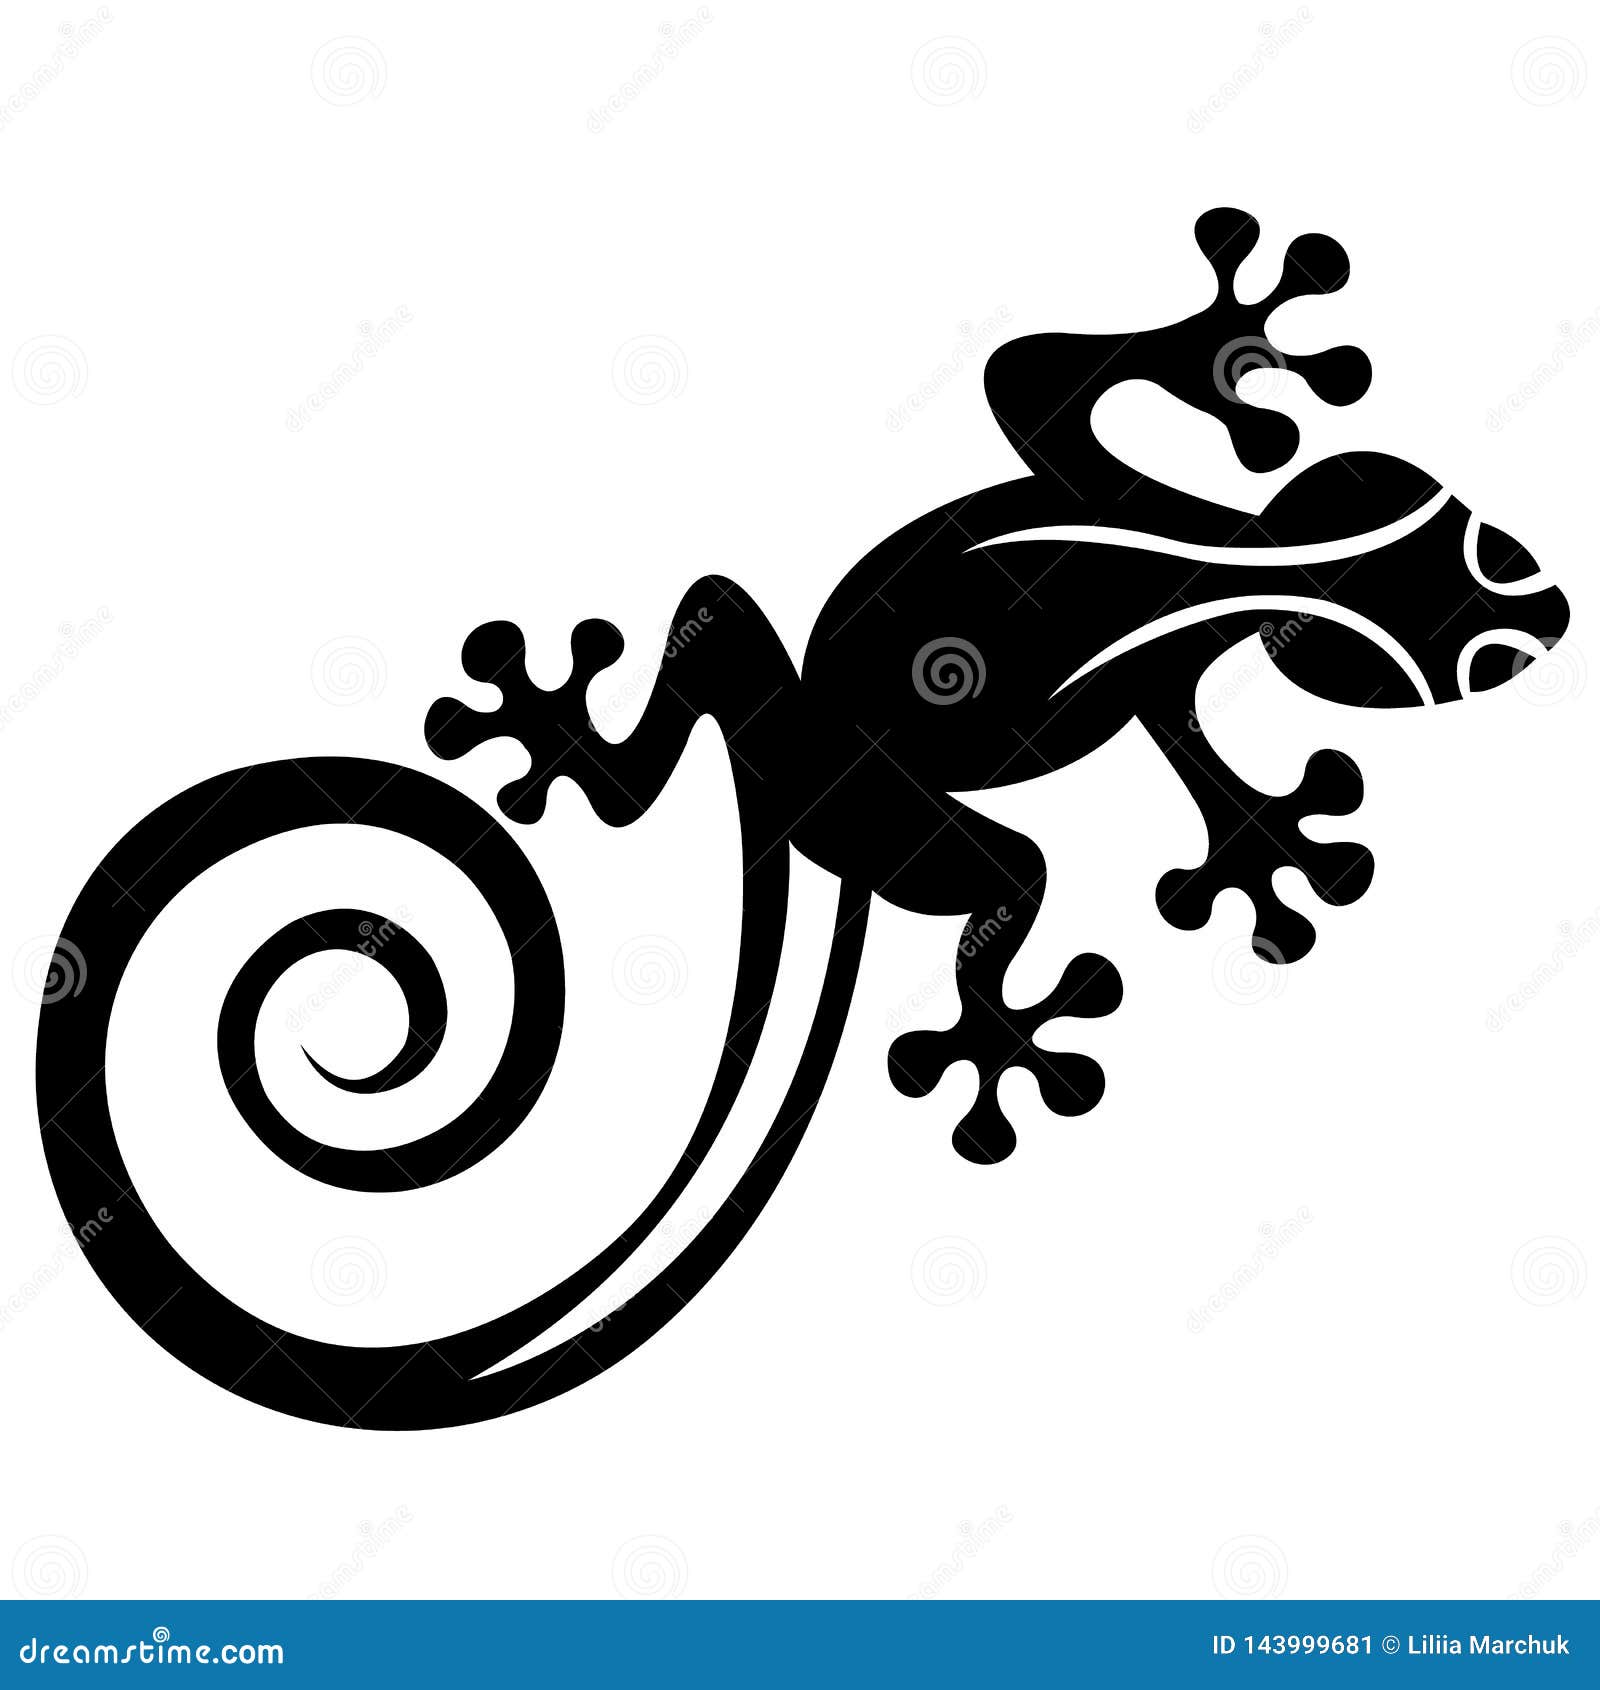 Silhouette Of A Lizard Salamendra Drawn In Black On A White Background